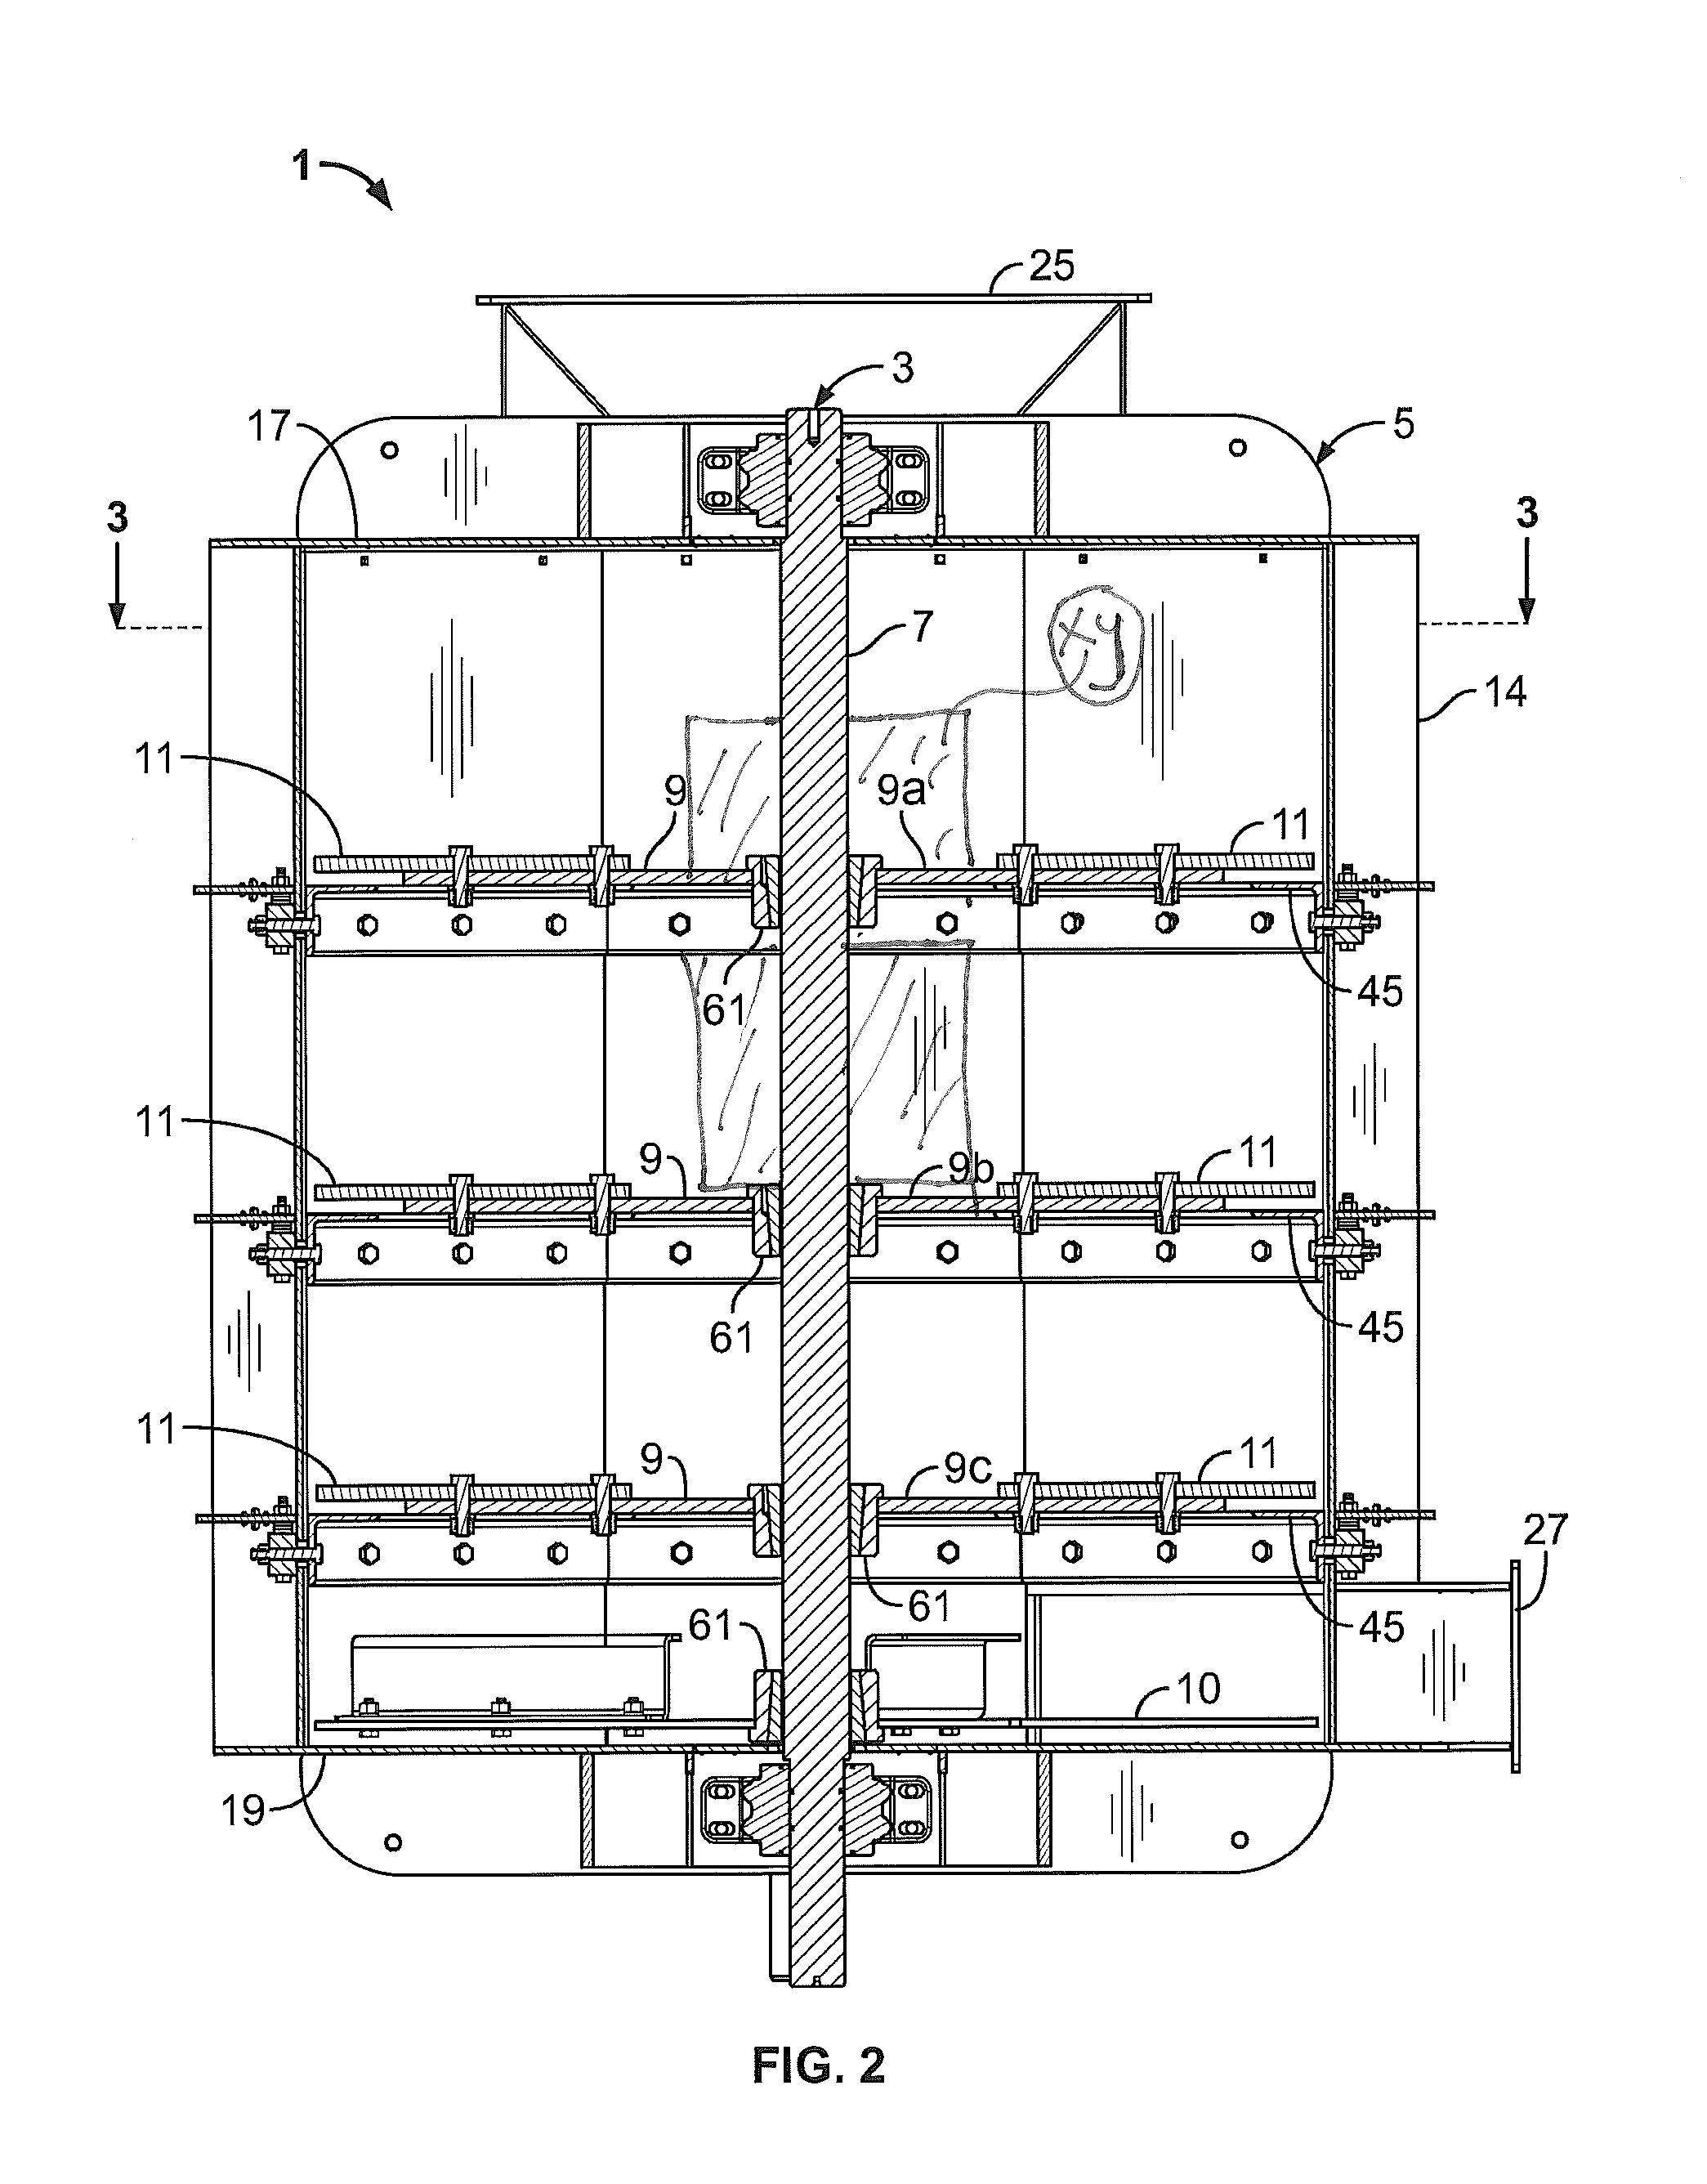 Apparatus and process for demanufacturing materials from composite manufactures